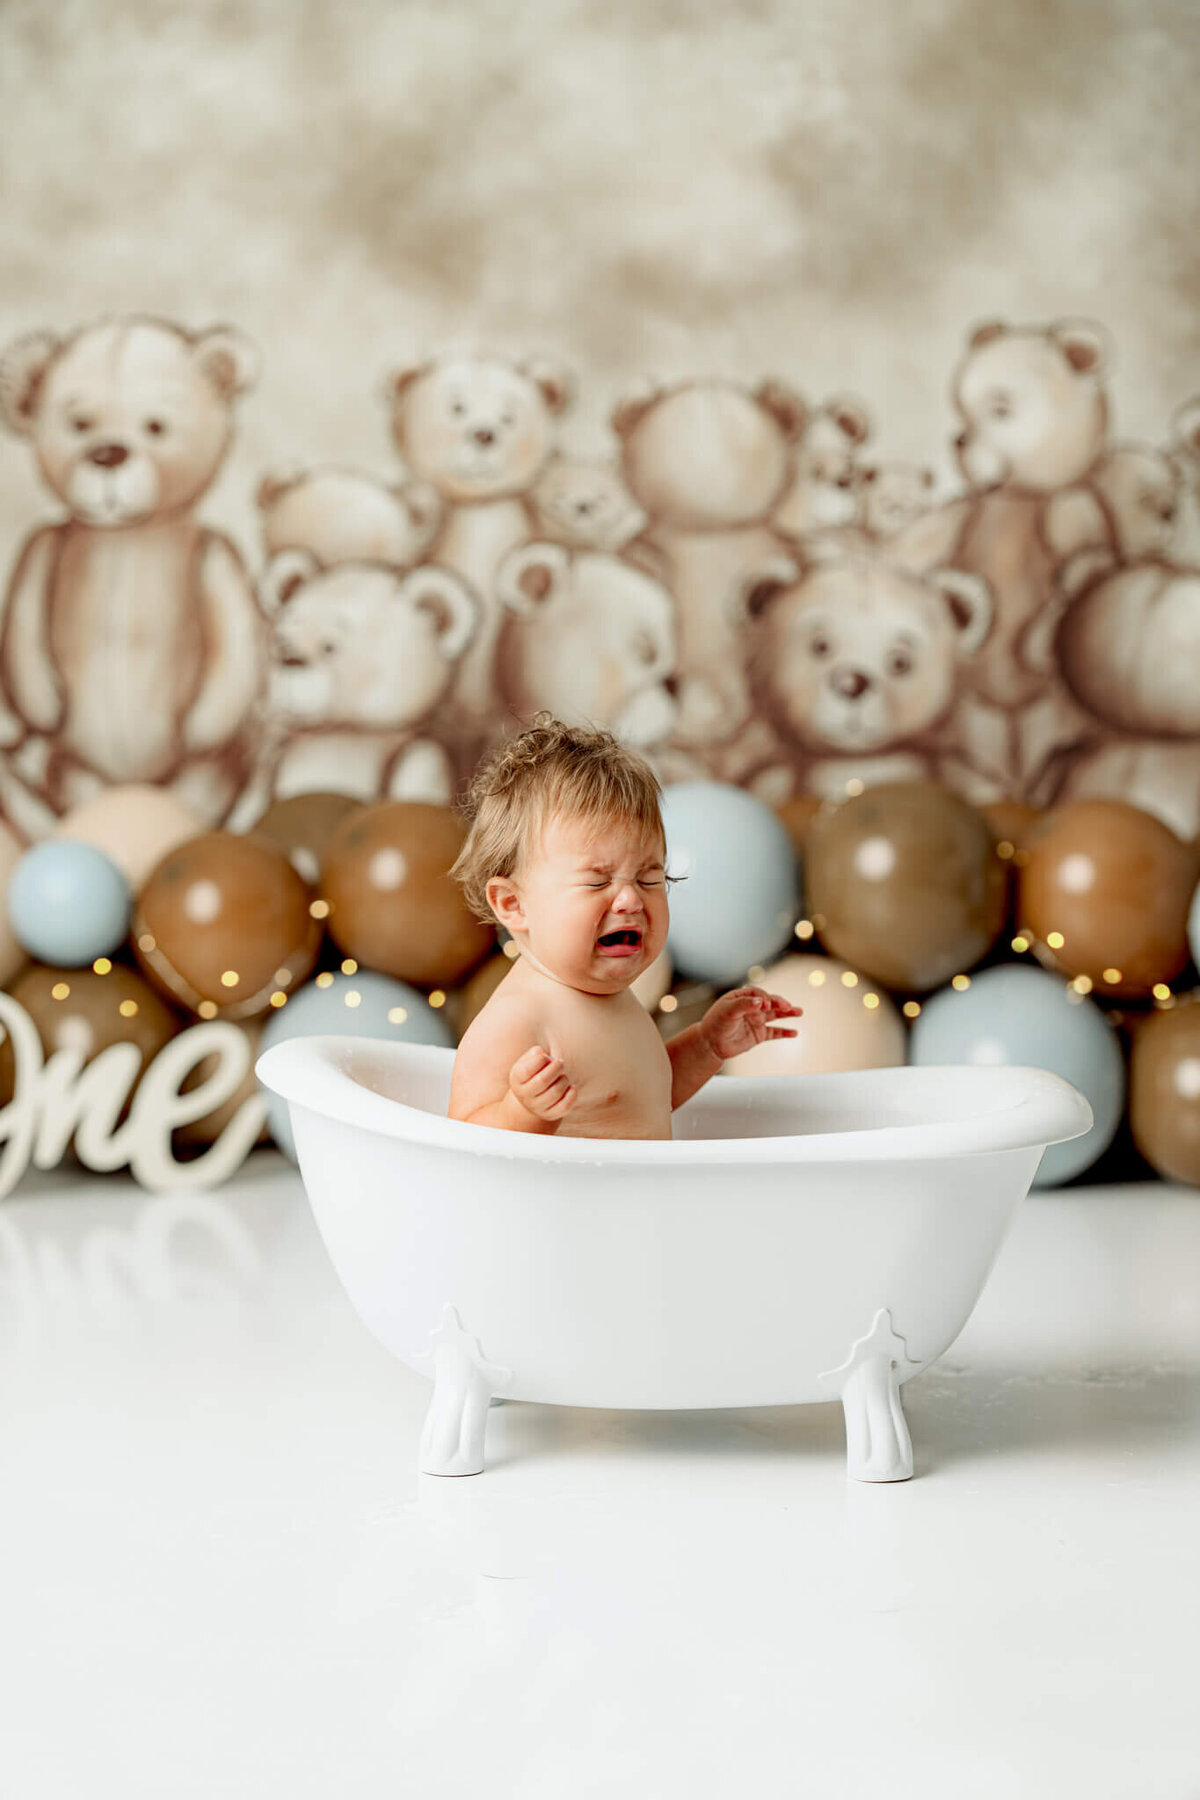 Toddler crying in tub prop